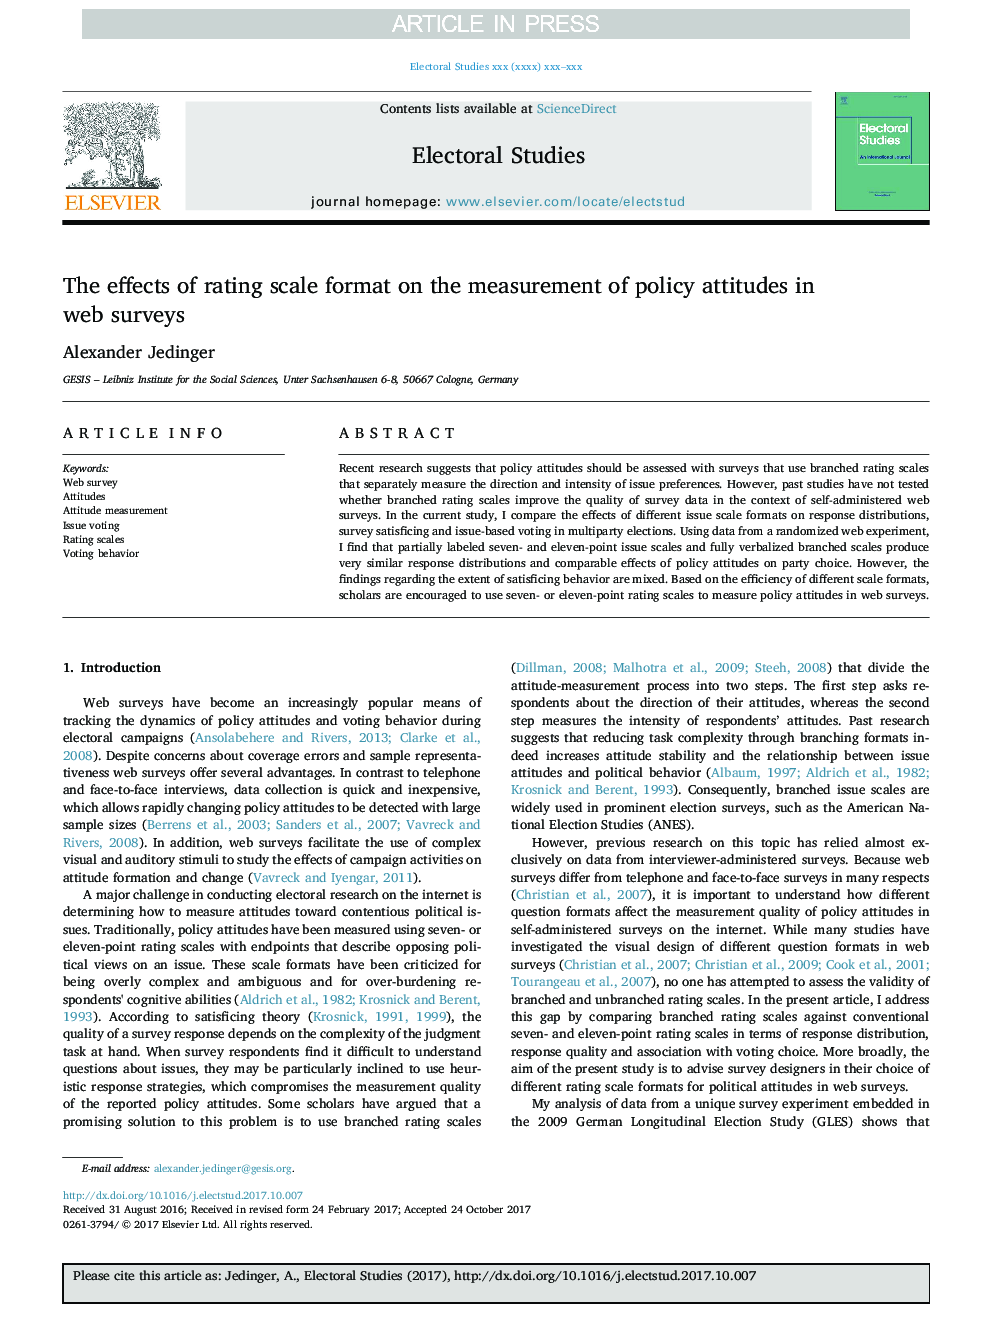 The effects of rating scale format on the measurement of policy attitudes in web surveys